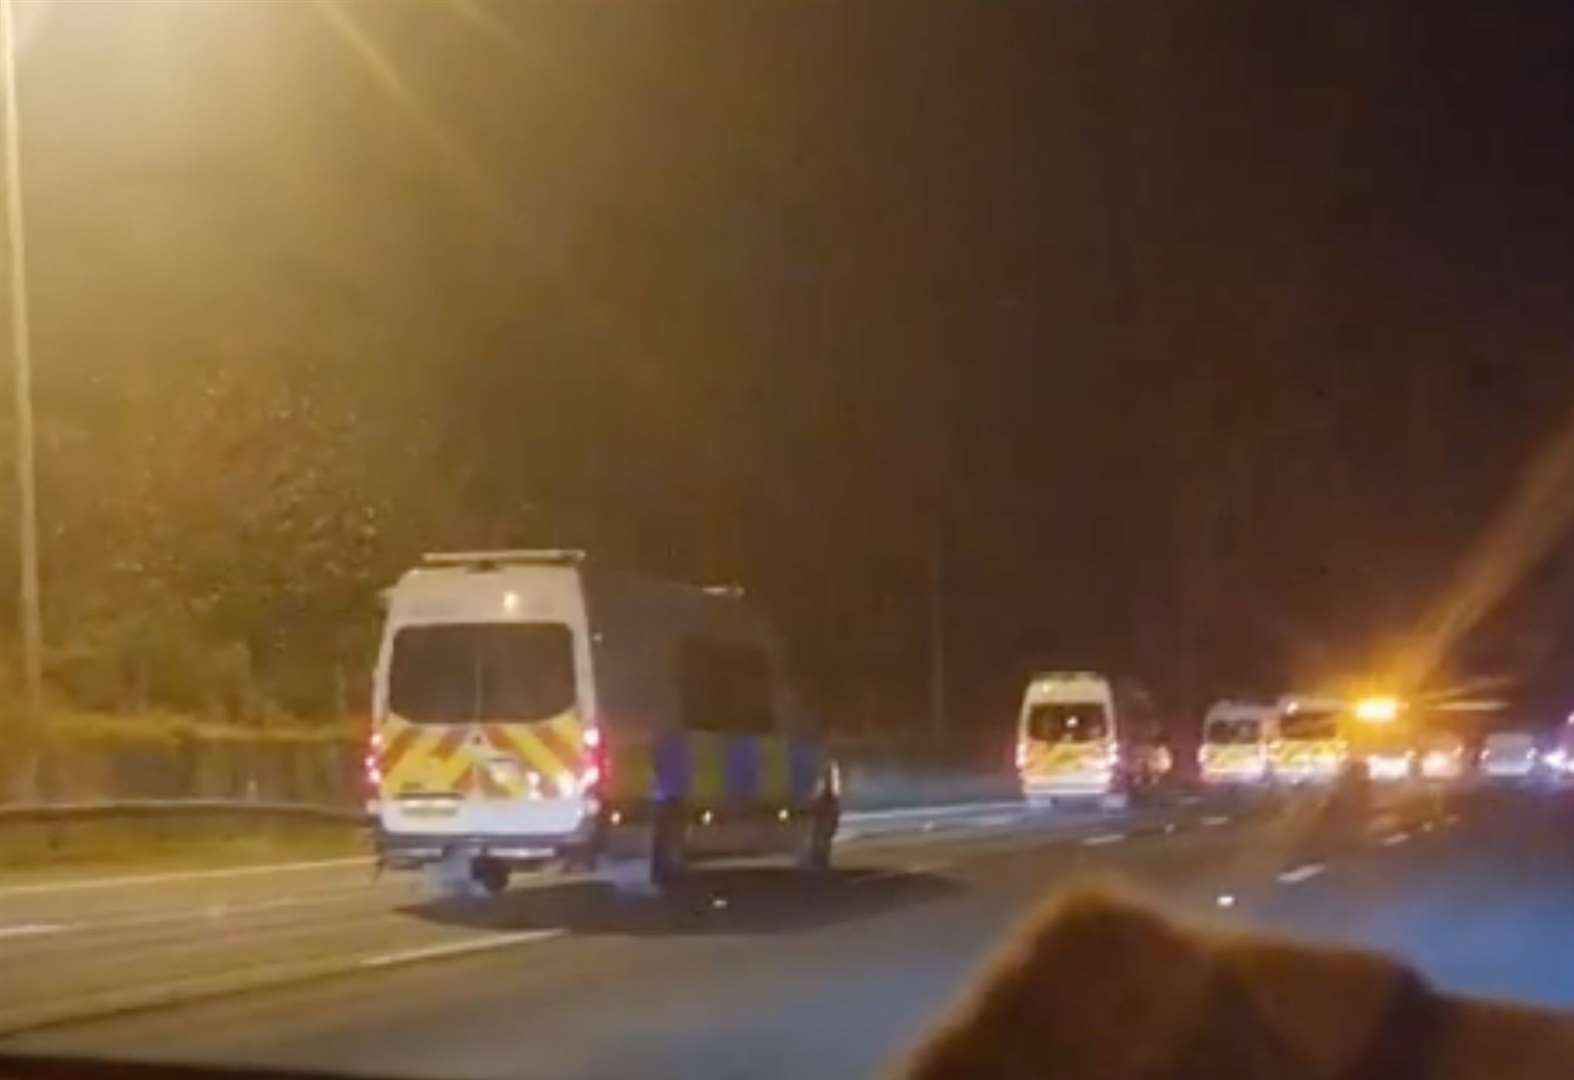 Did you see mystery police convoy?